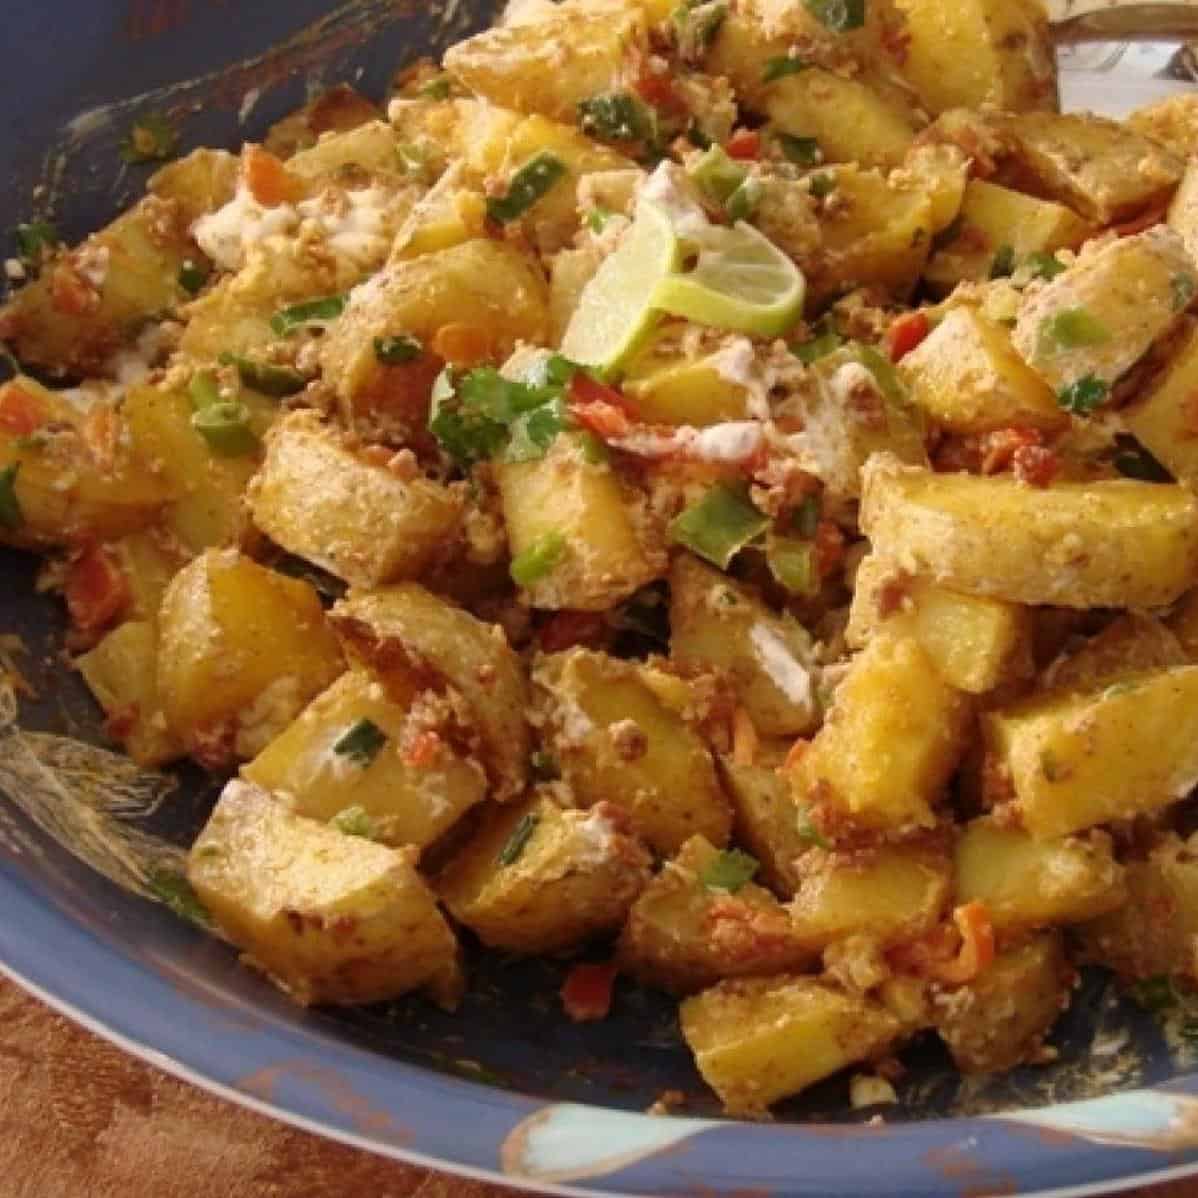  This potato salad is a fiesta on your taste buds!